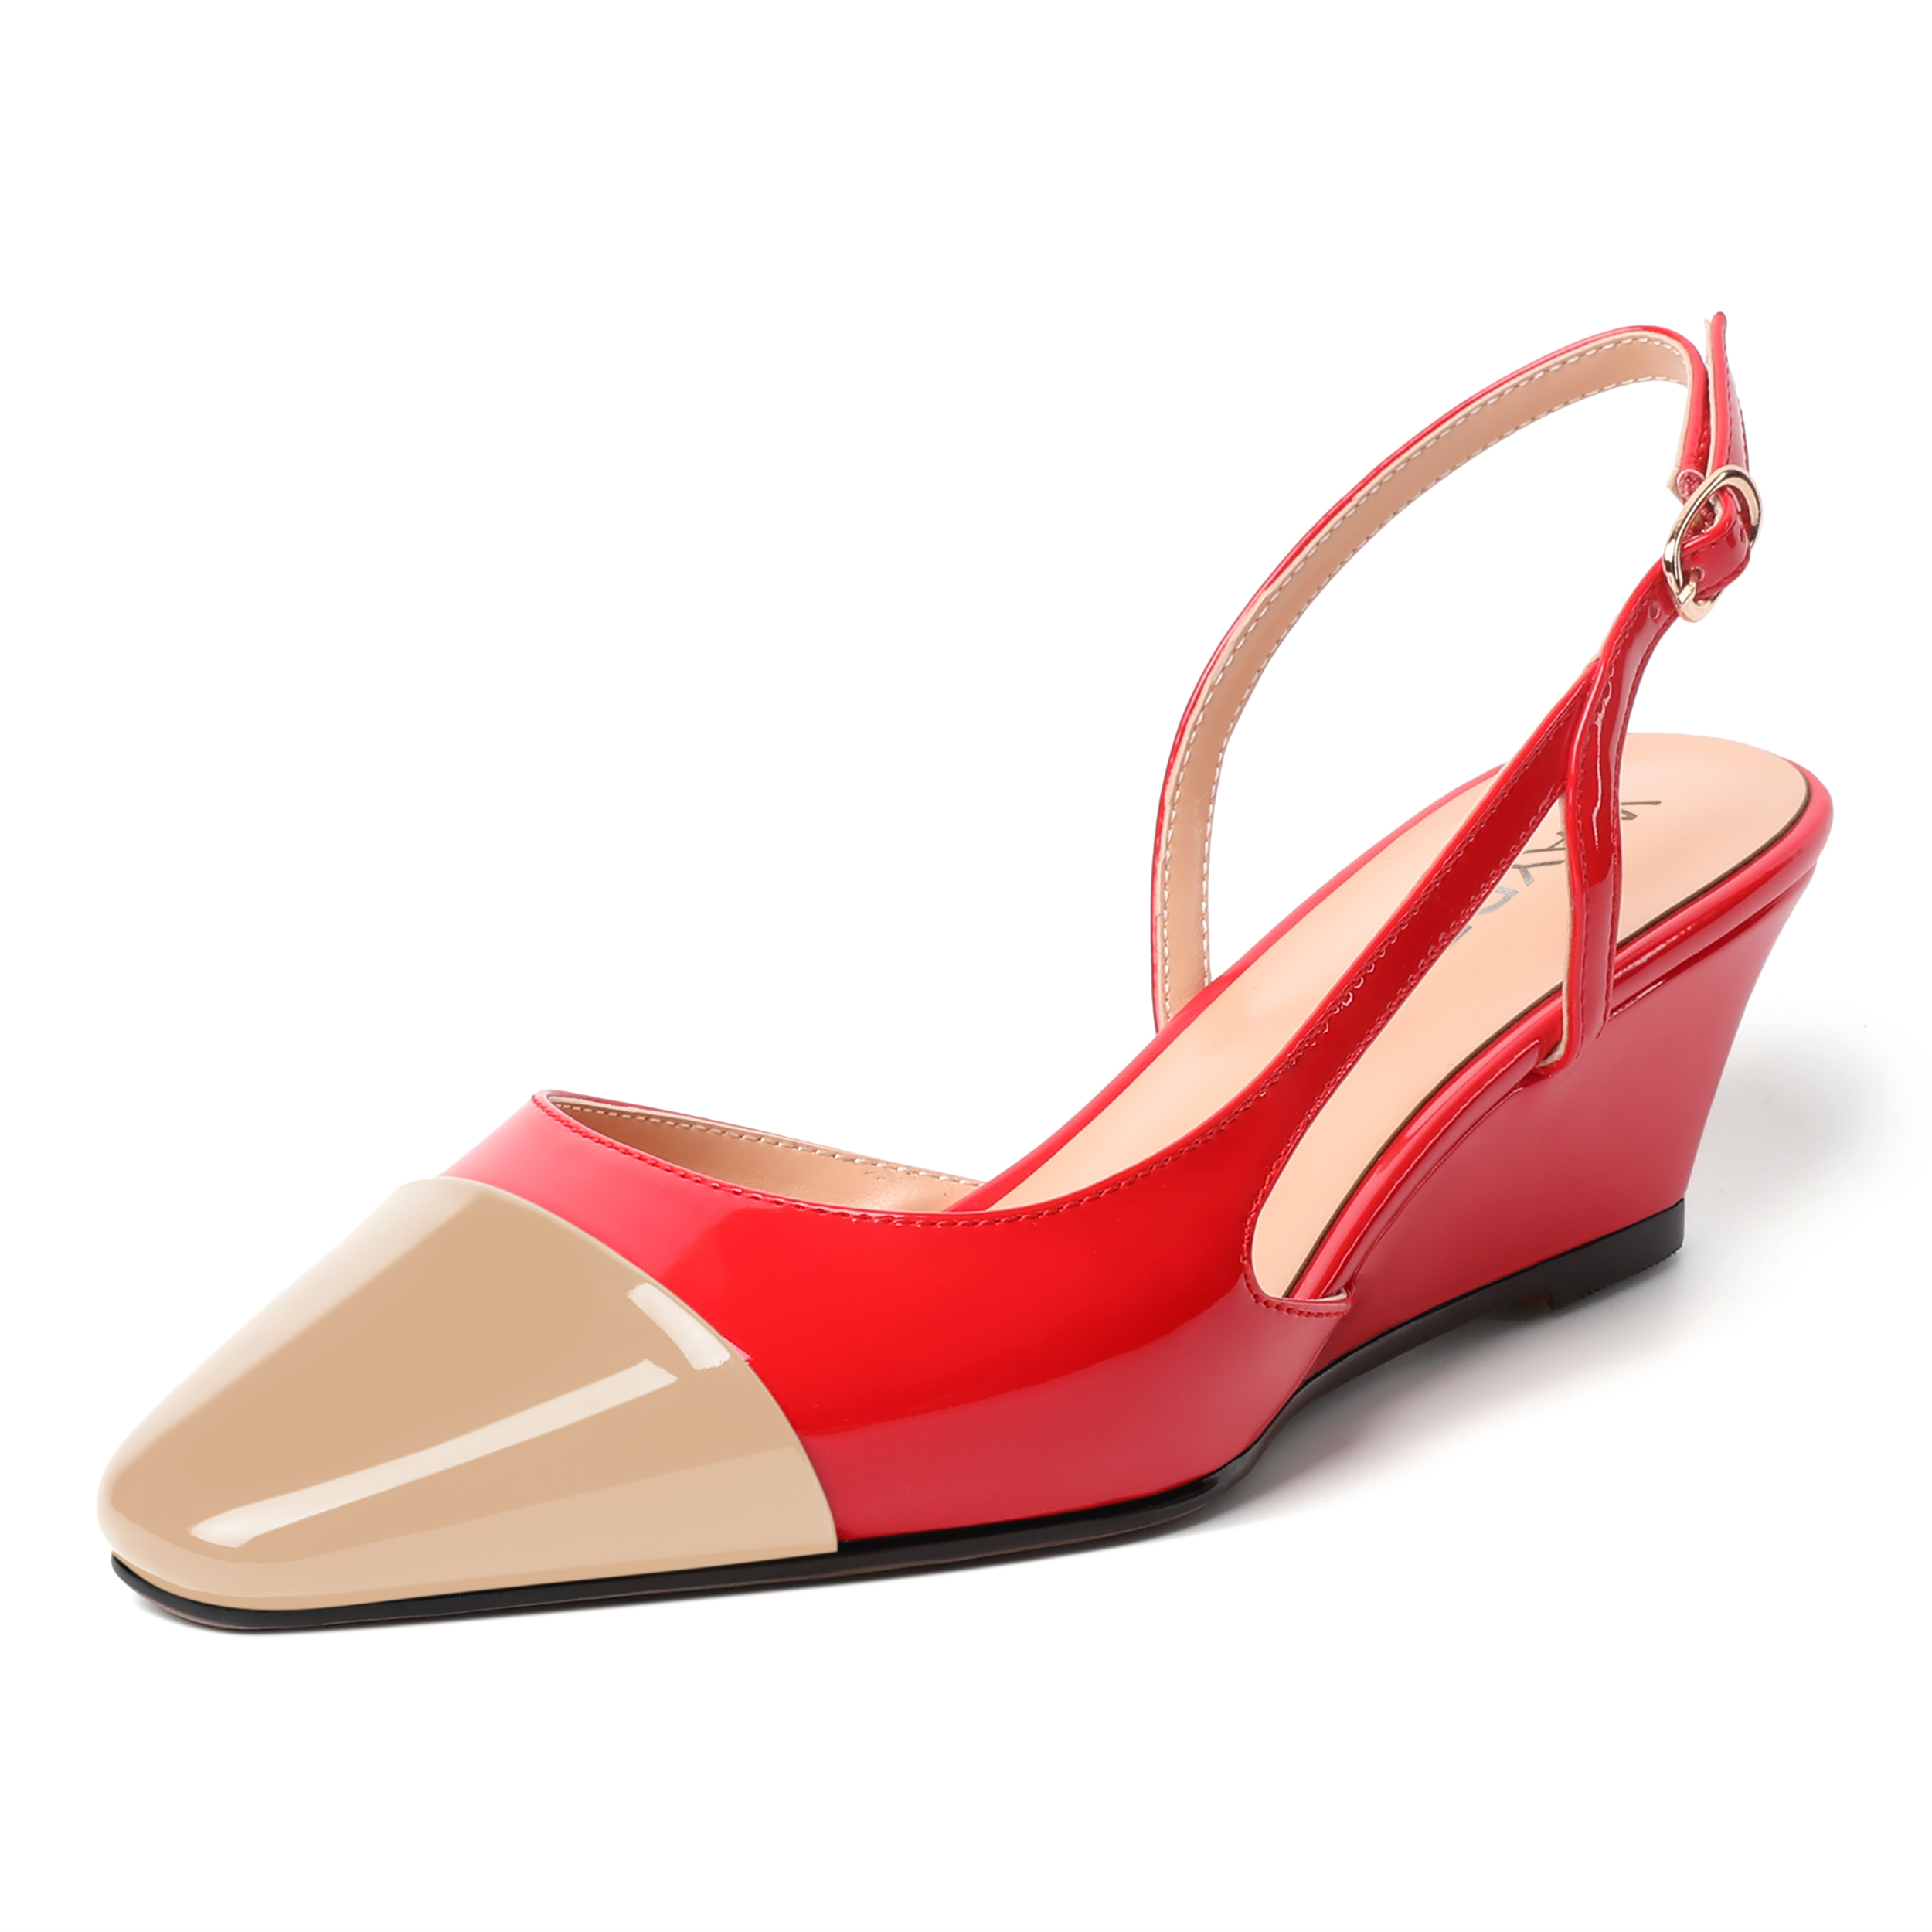 Betsy Slingback Patent Square Toe Buckle Pumps Heels